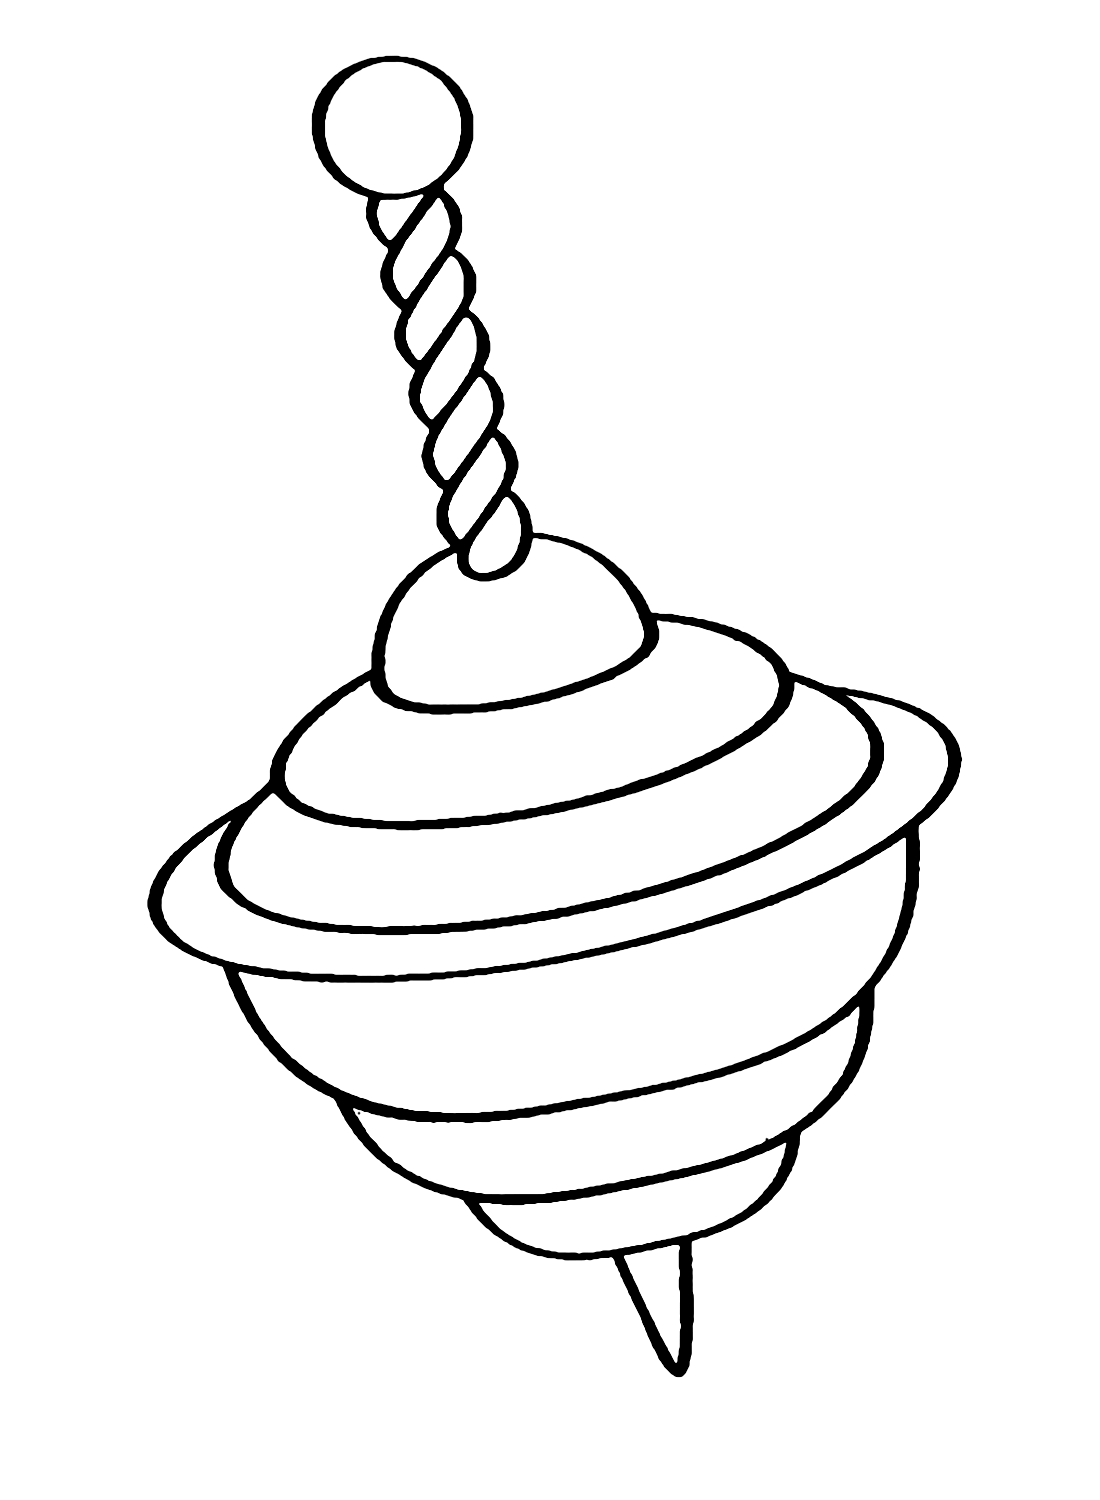 Whirligig Toy Coloring Page